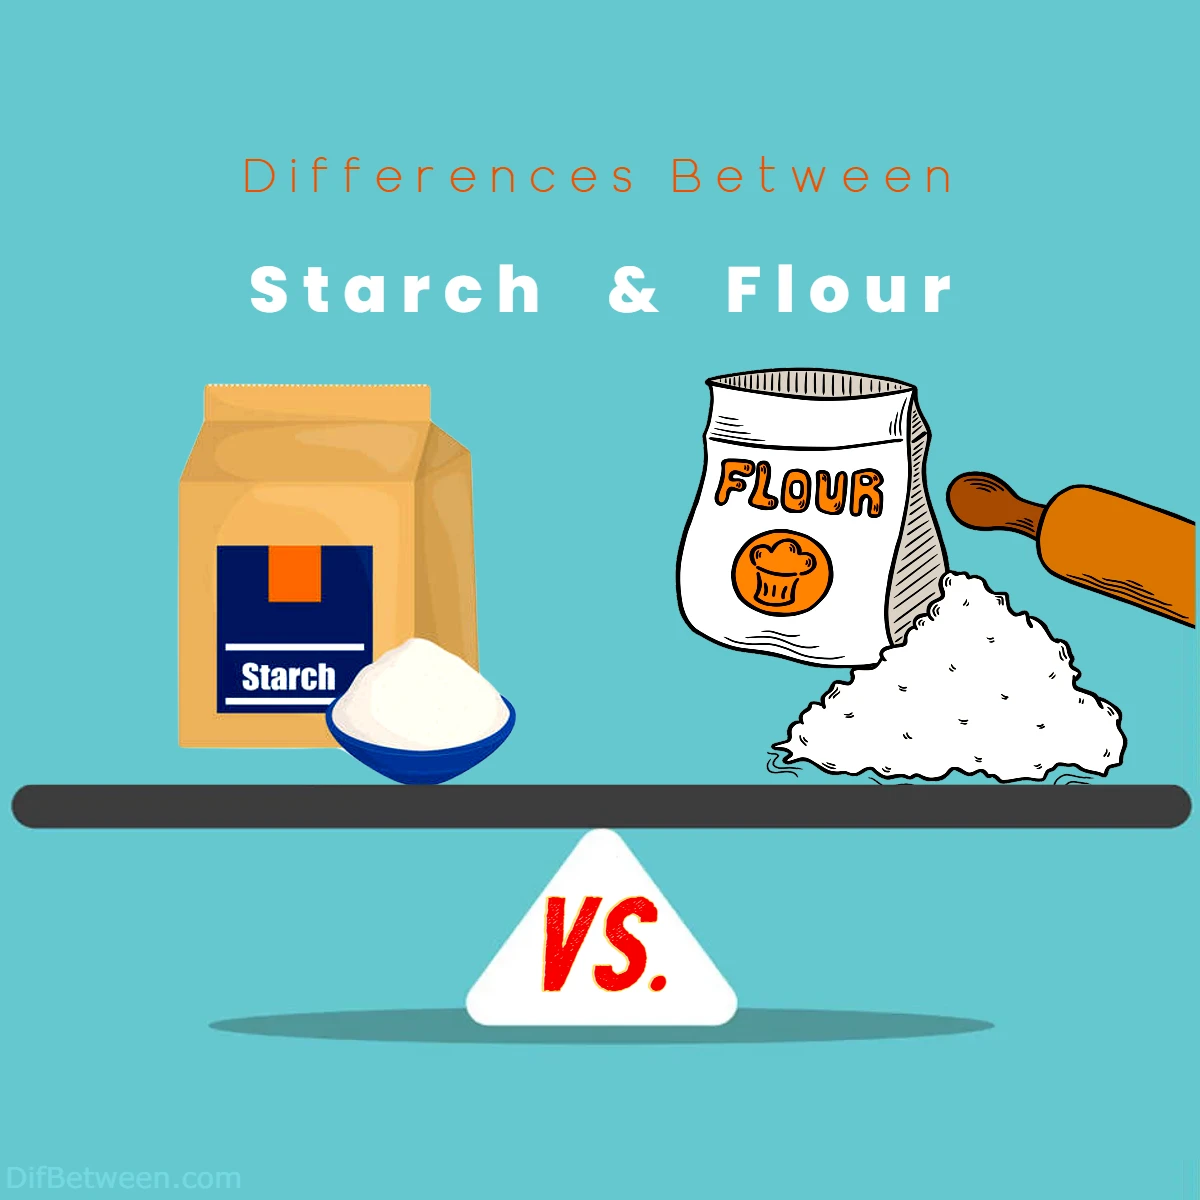 Differences Between Starch vs Flour